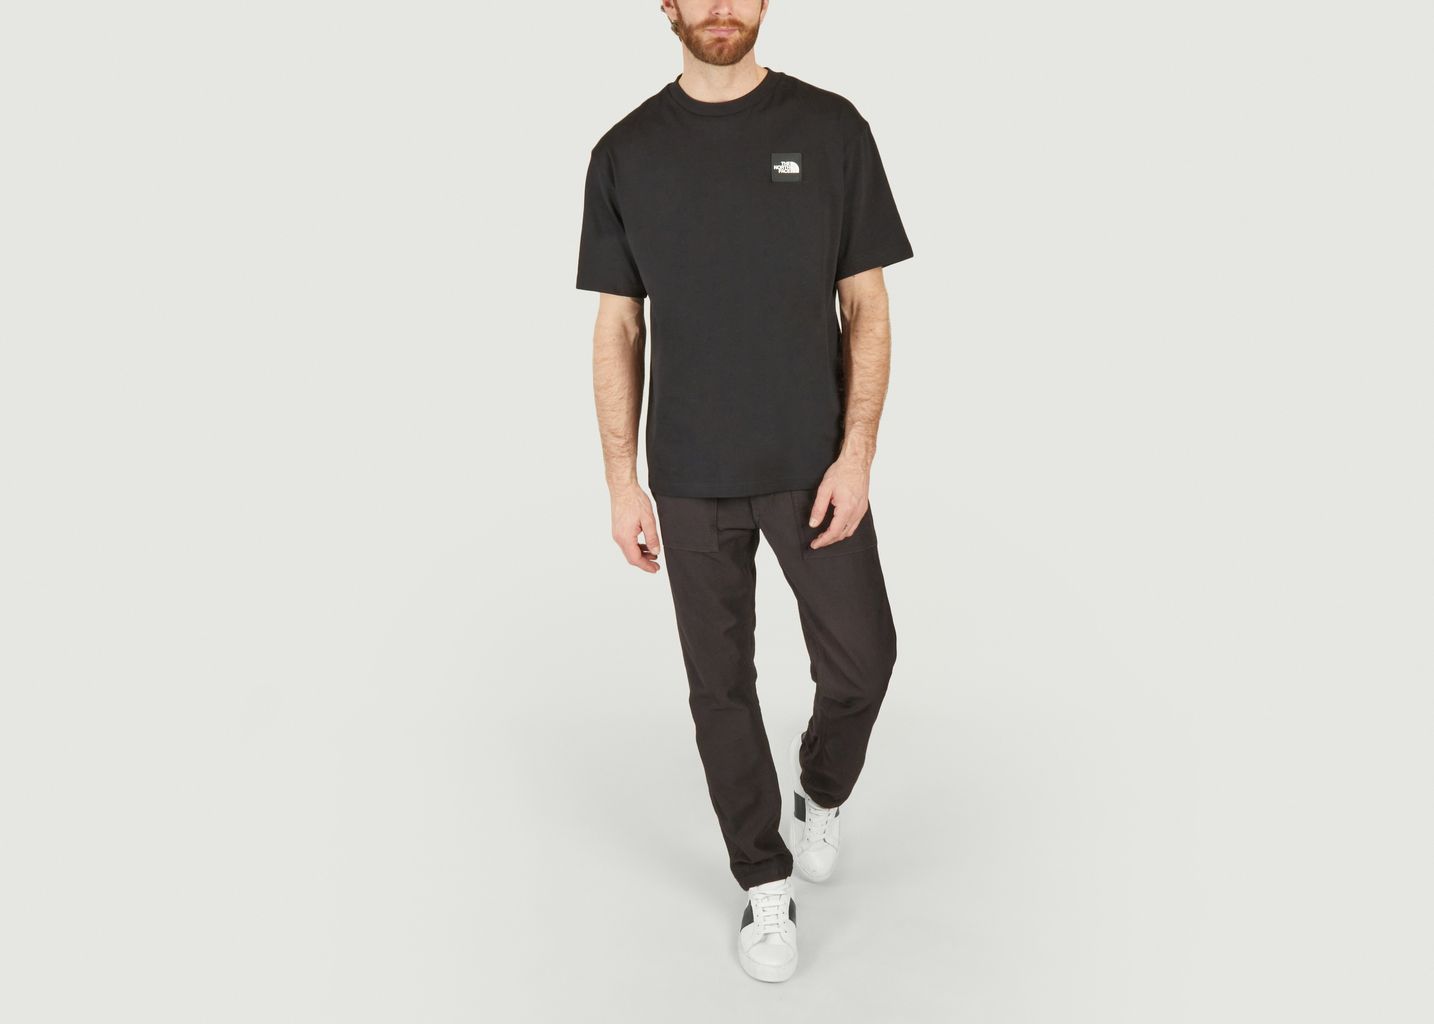 NSE SS TNF Patch T-shirt - The North Face